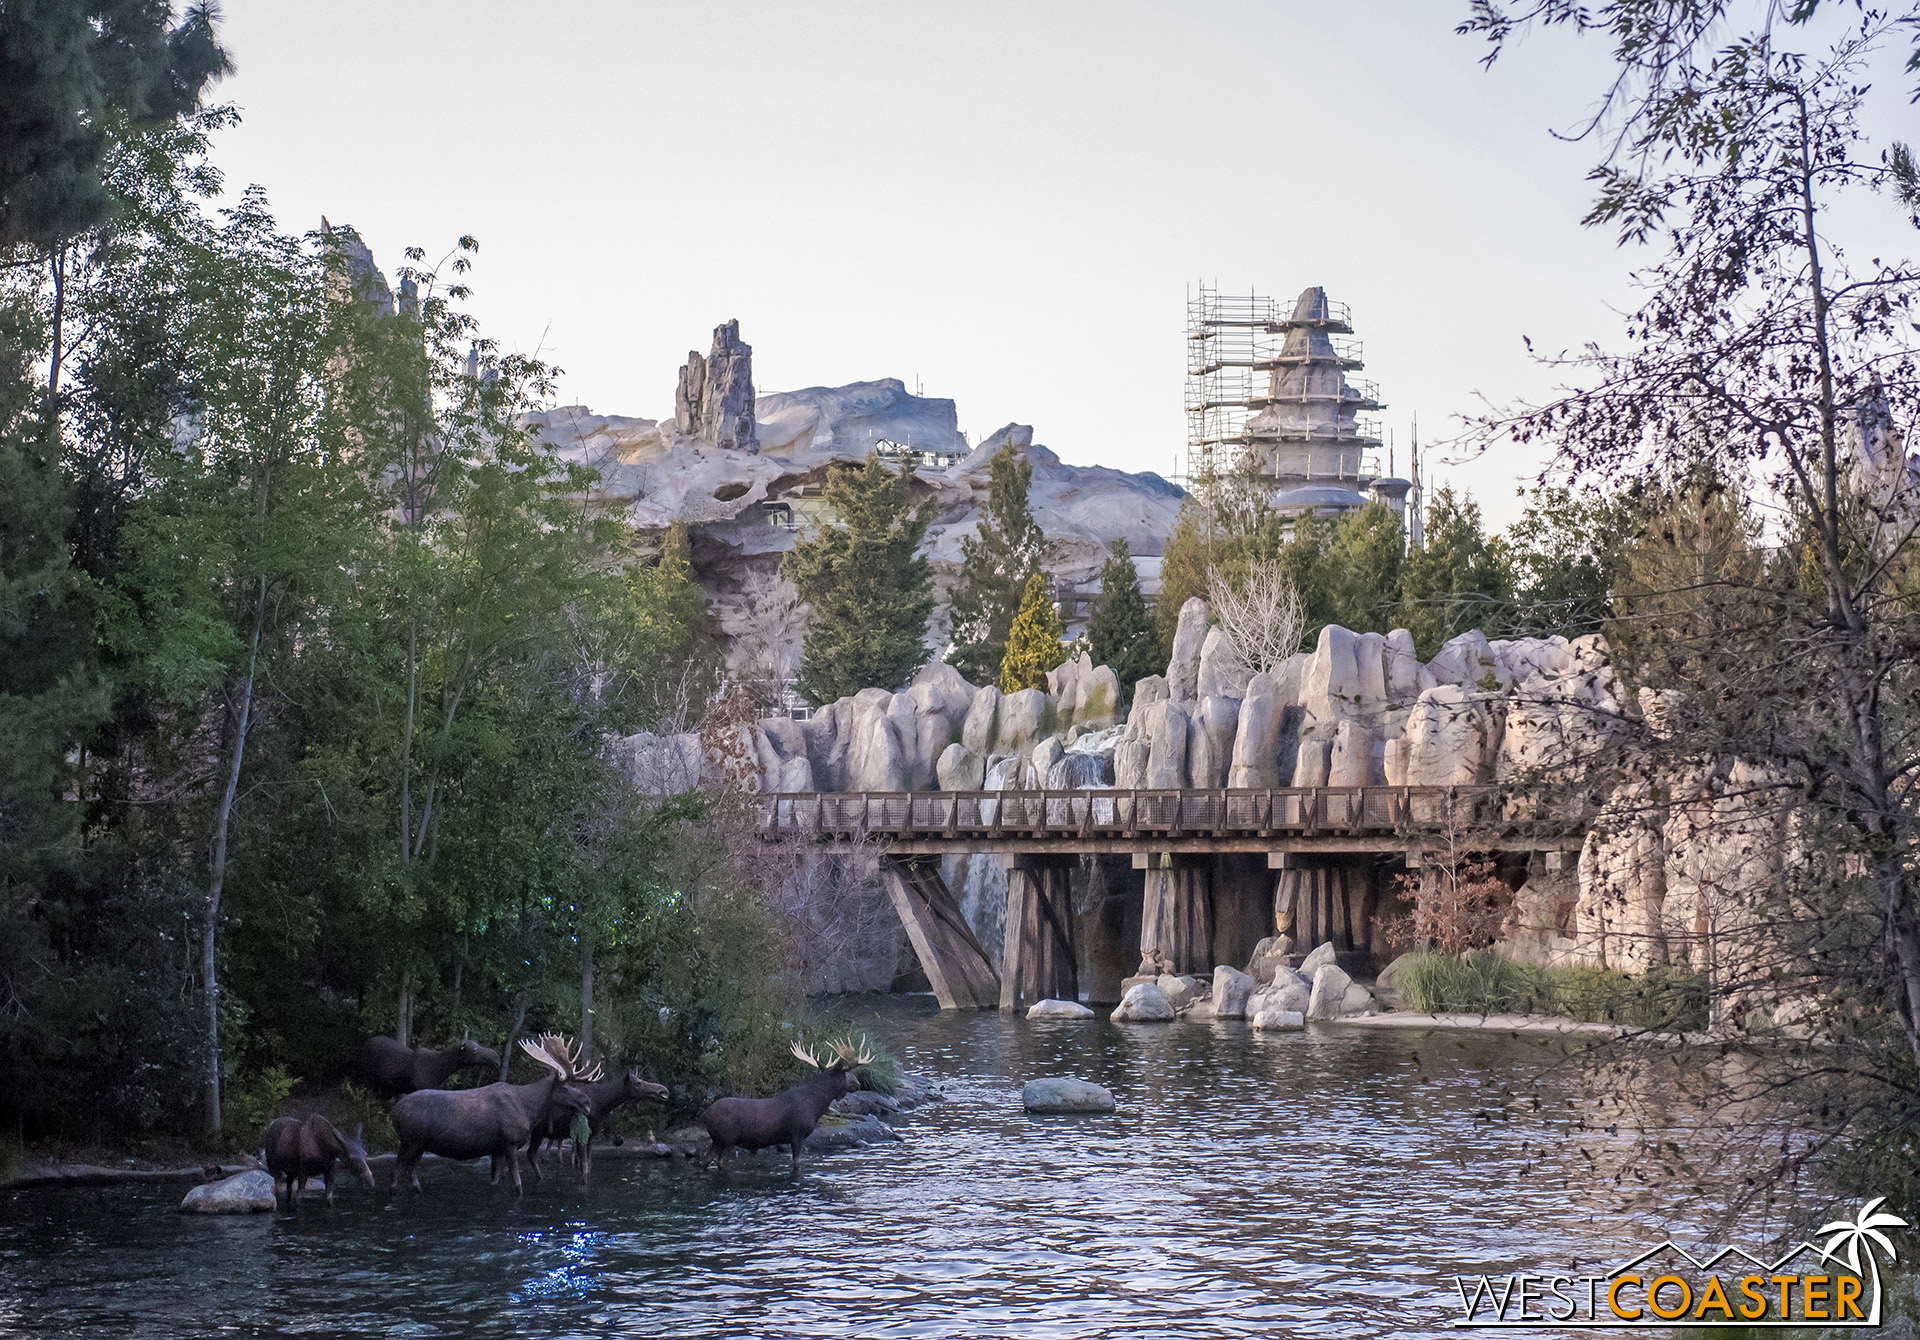  Disney is rethinking and reshaping the theme park experience with “Star Wars” Land.  This won’t be simply a place where guests come to ride rides and see pretty scenery and have a story loosely communicated to them.  This will be a place where guest